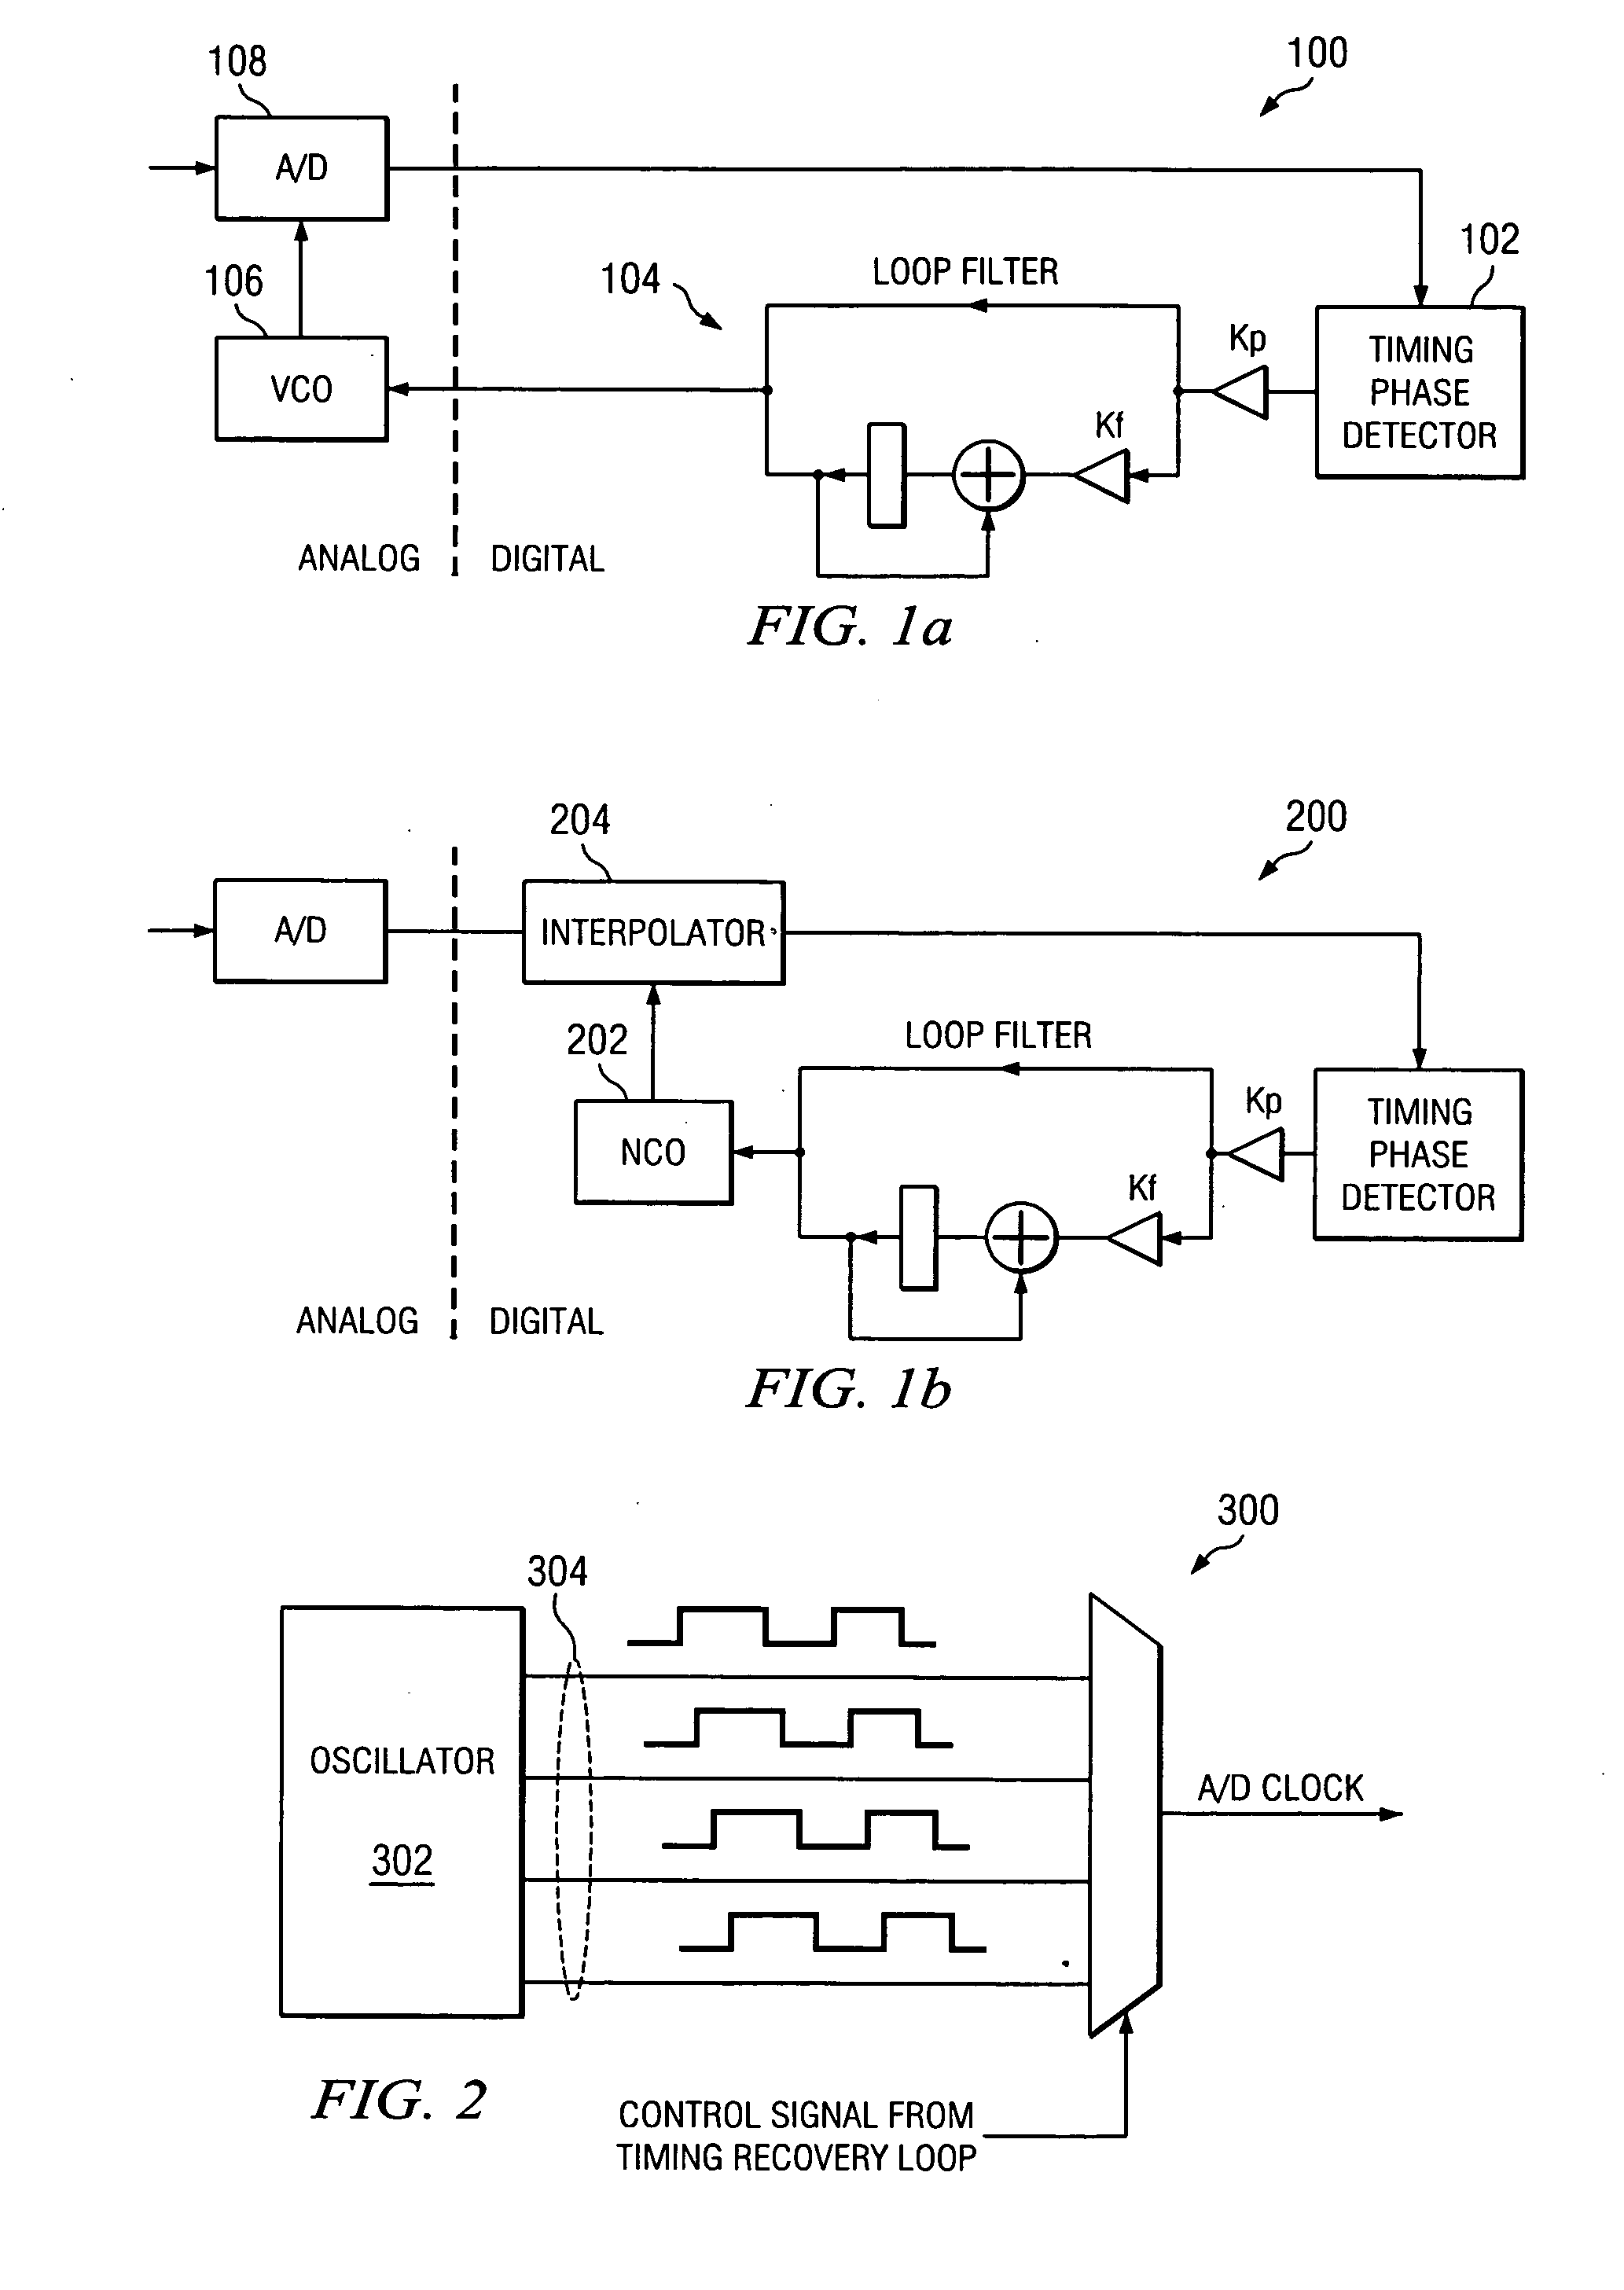 Timing recovery of PAM signals using baud rate interpolation